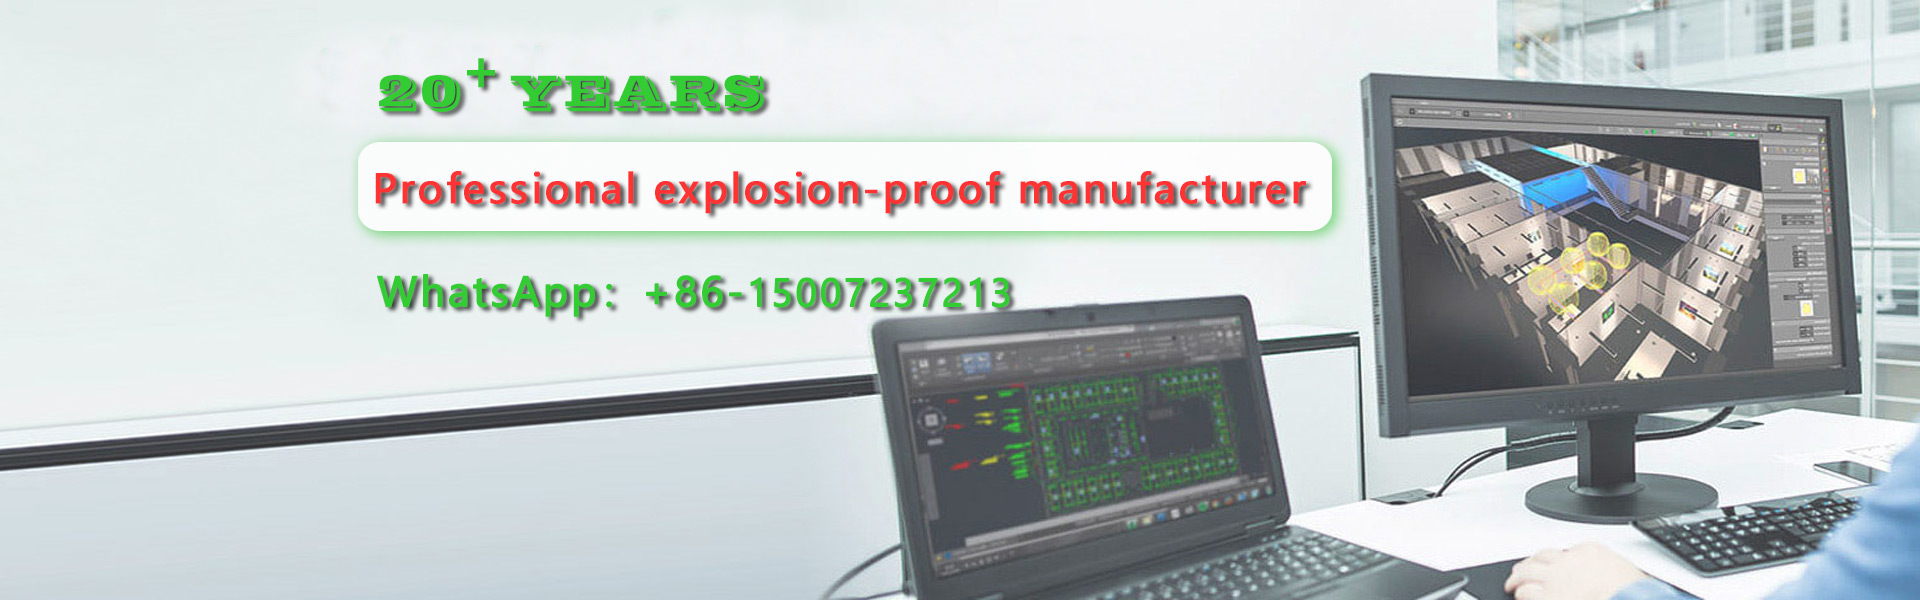 Chinese explosion-proof electrical manufacturer